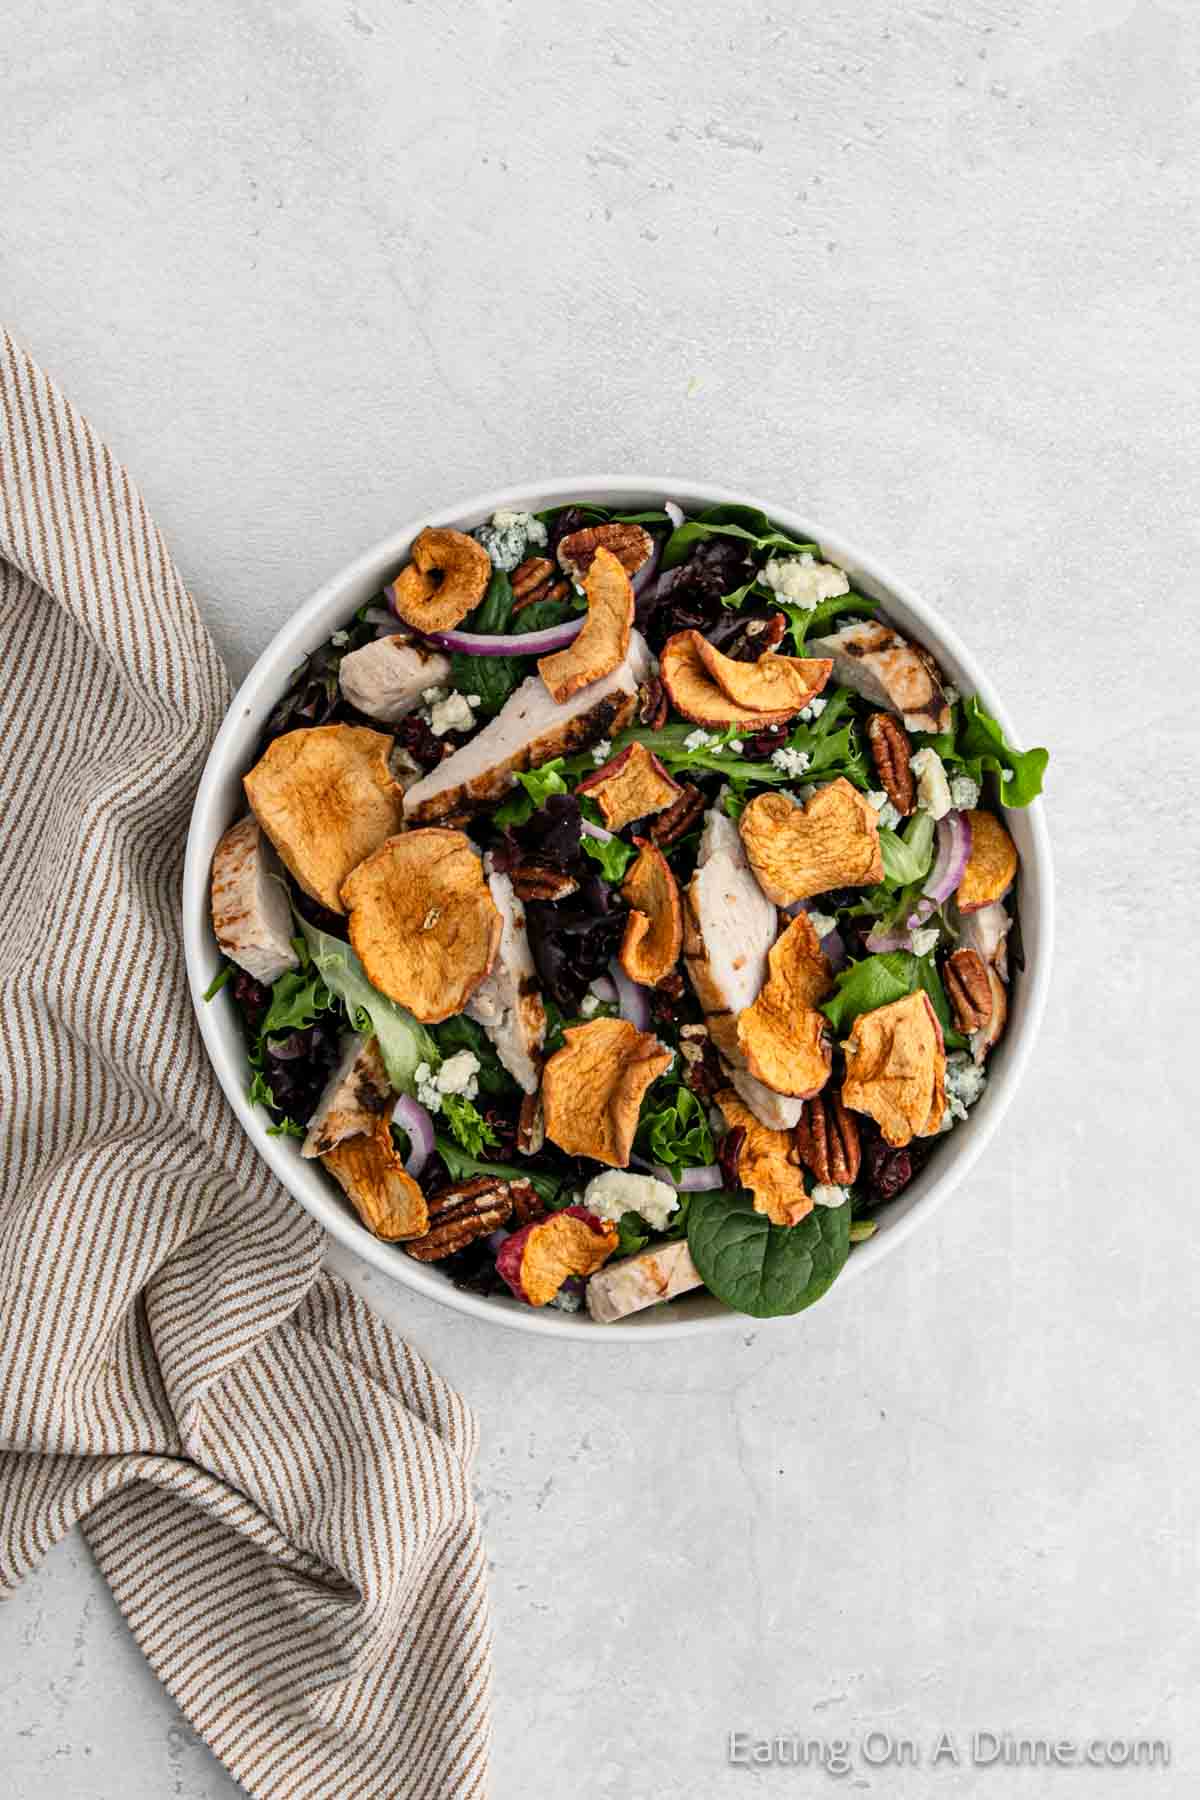 Mixed greens in a bowl topped with red onions, dried apples, grilled chicken